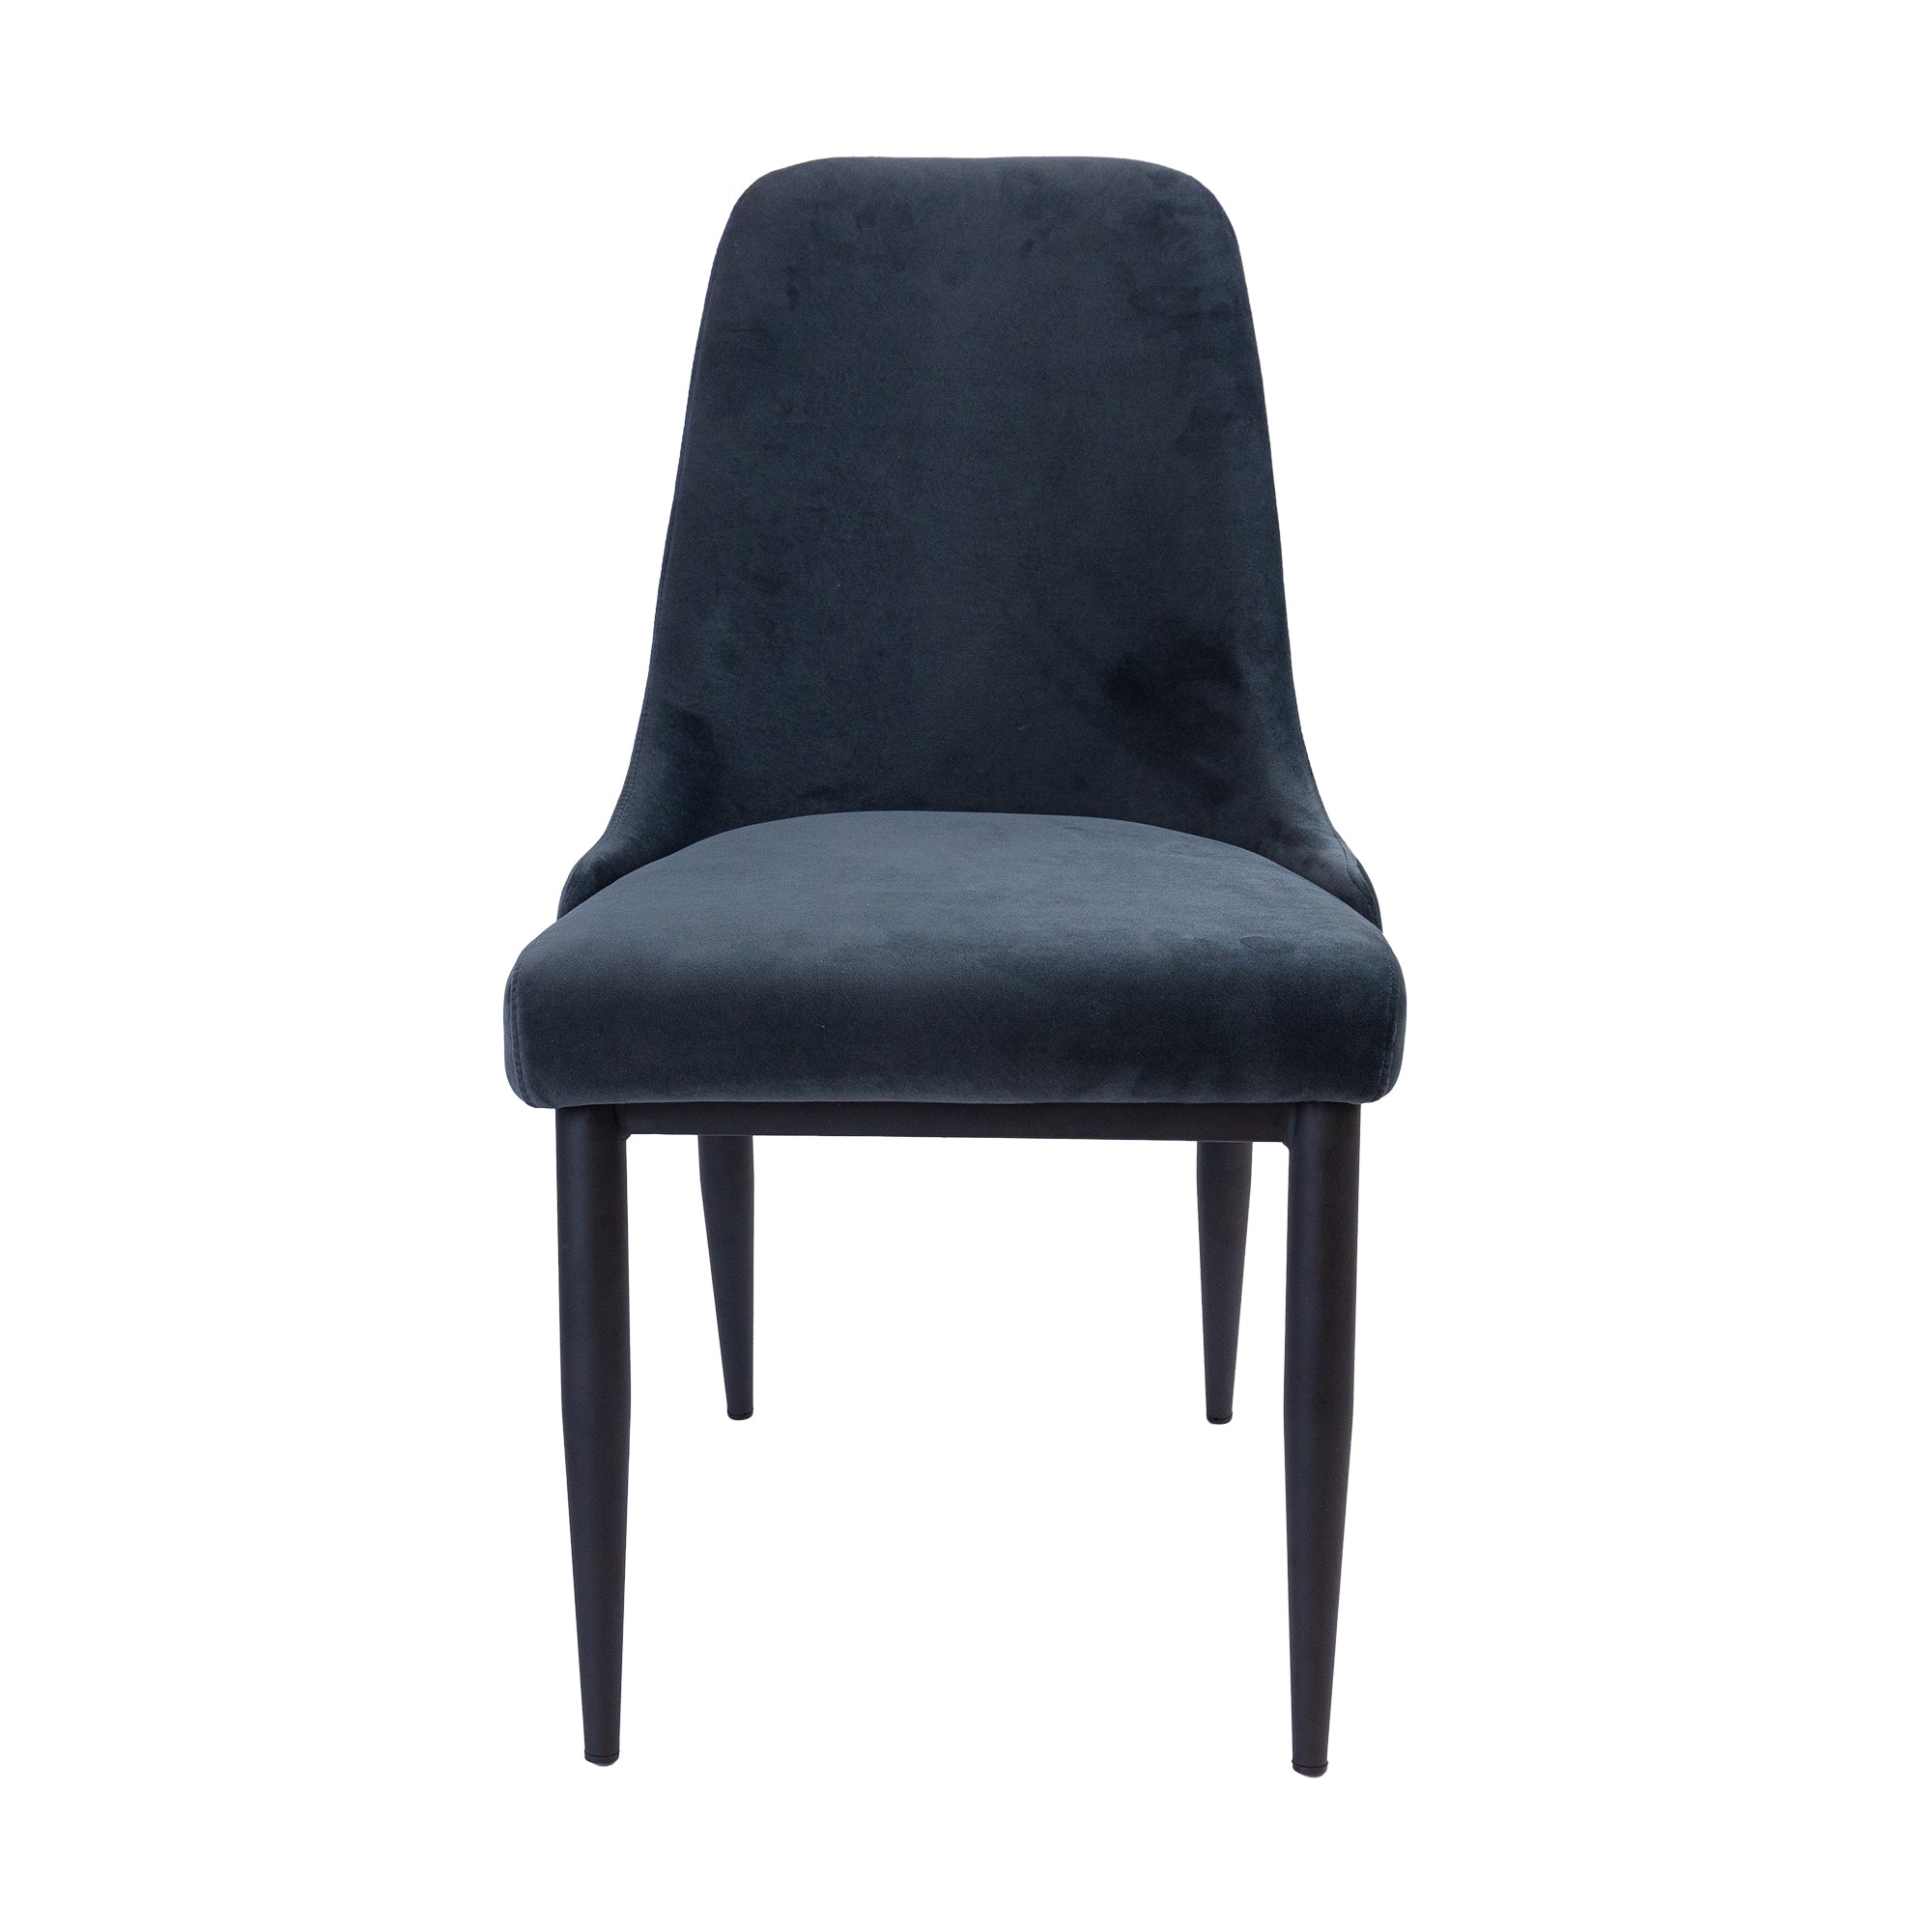 Charcoal Velvet Upholstered Dining Chair Set with Metal Frame - 4 pcs